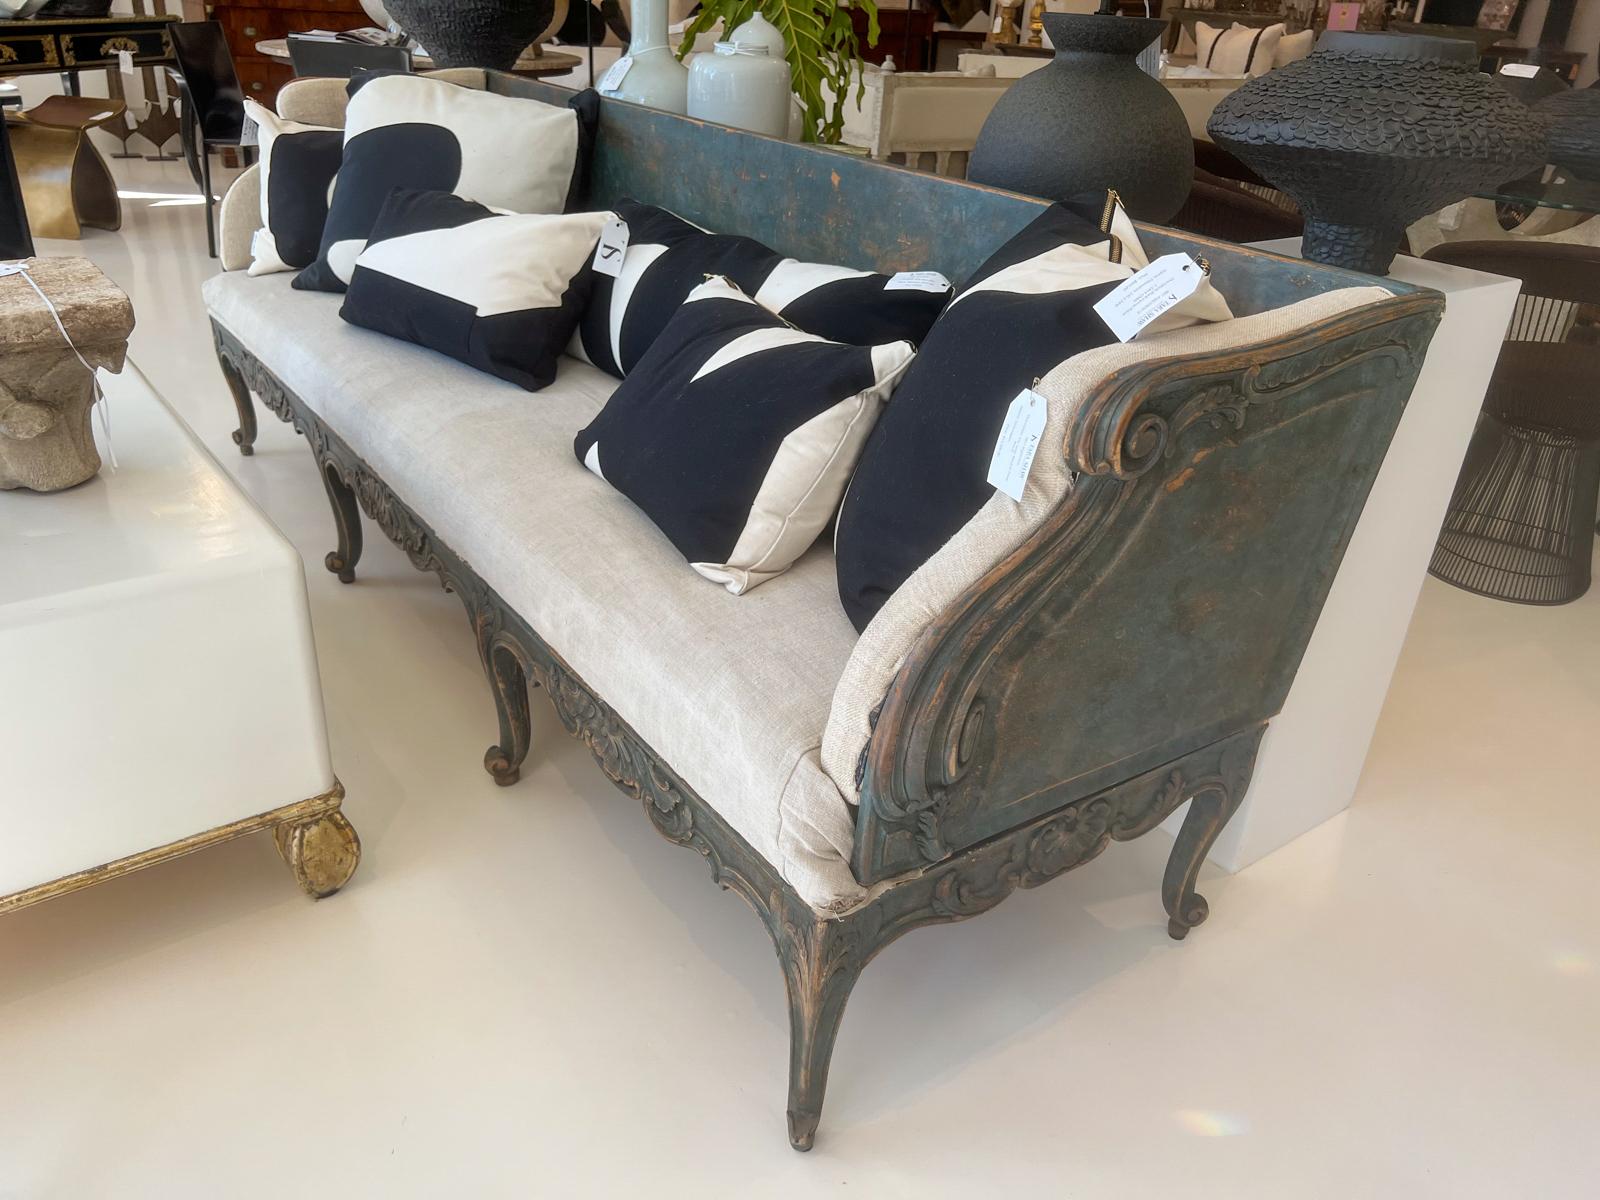 Long trag bench from Sweden. Beautiful finish in shades of blue, nicely distressed. Upholstered in flax linen.